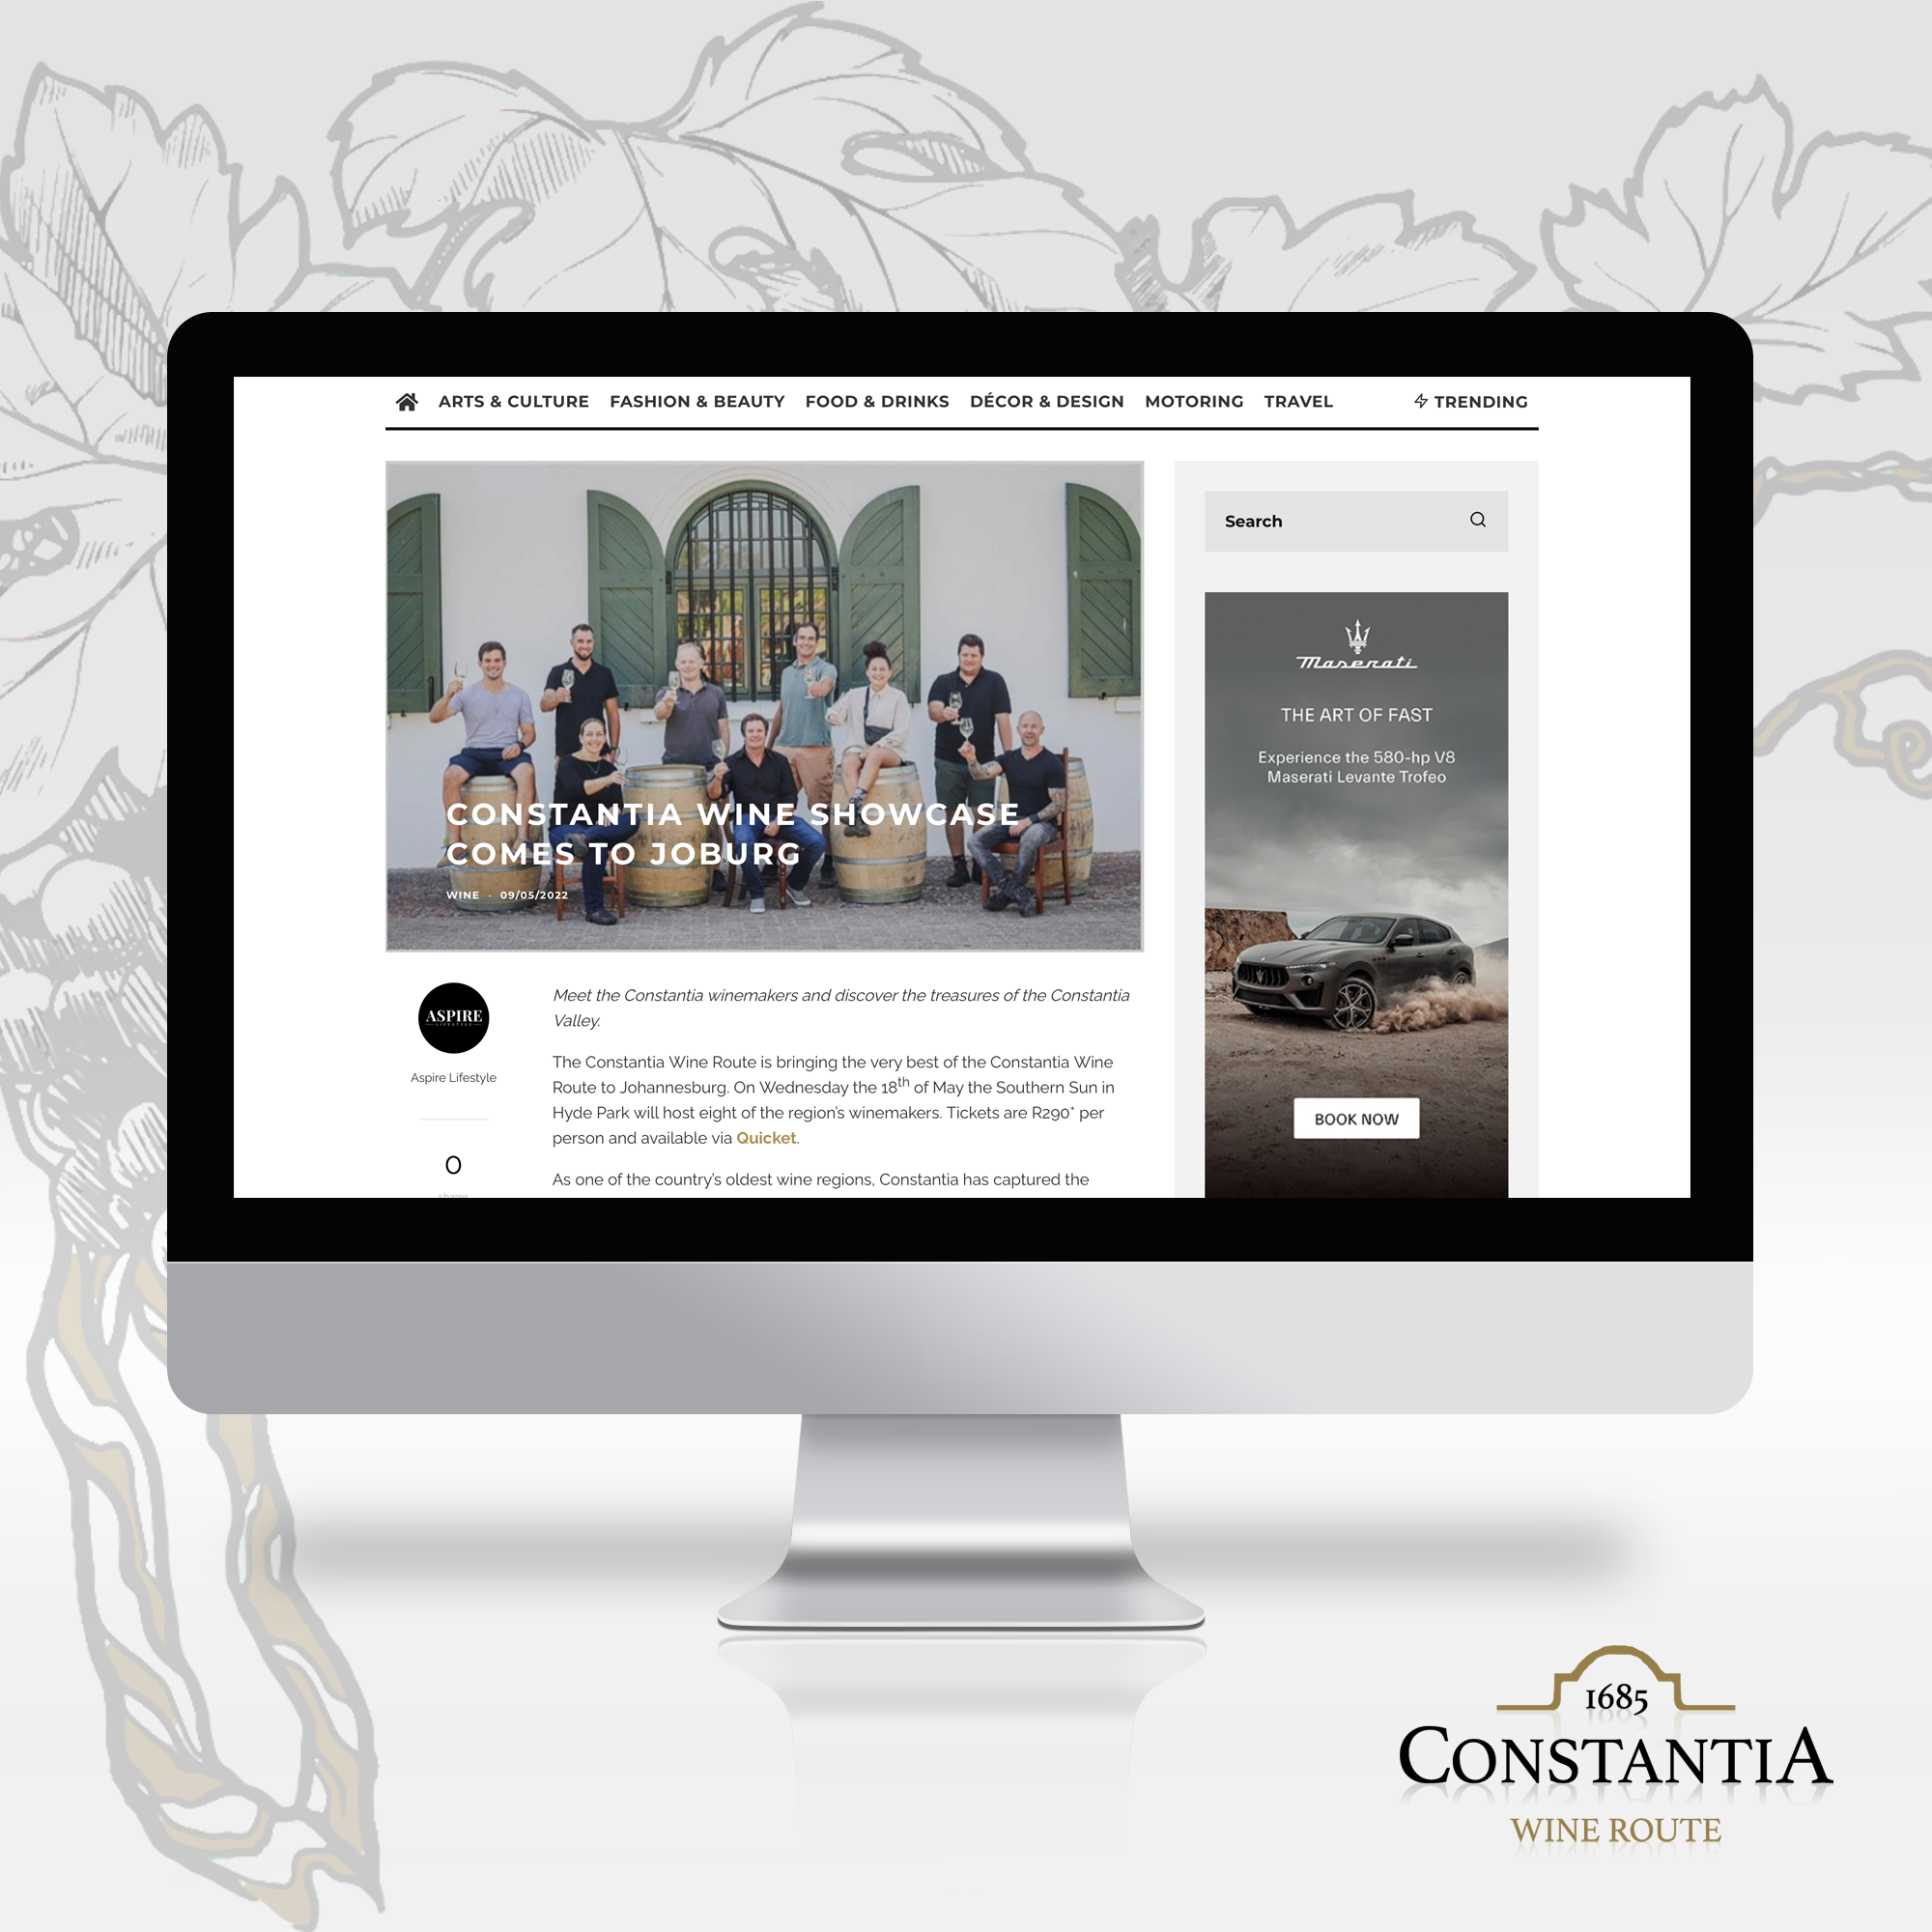 Featured image for “Constantia wine showcase comes to Joburg”